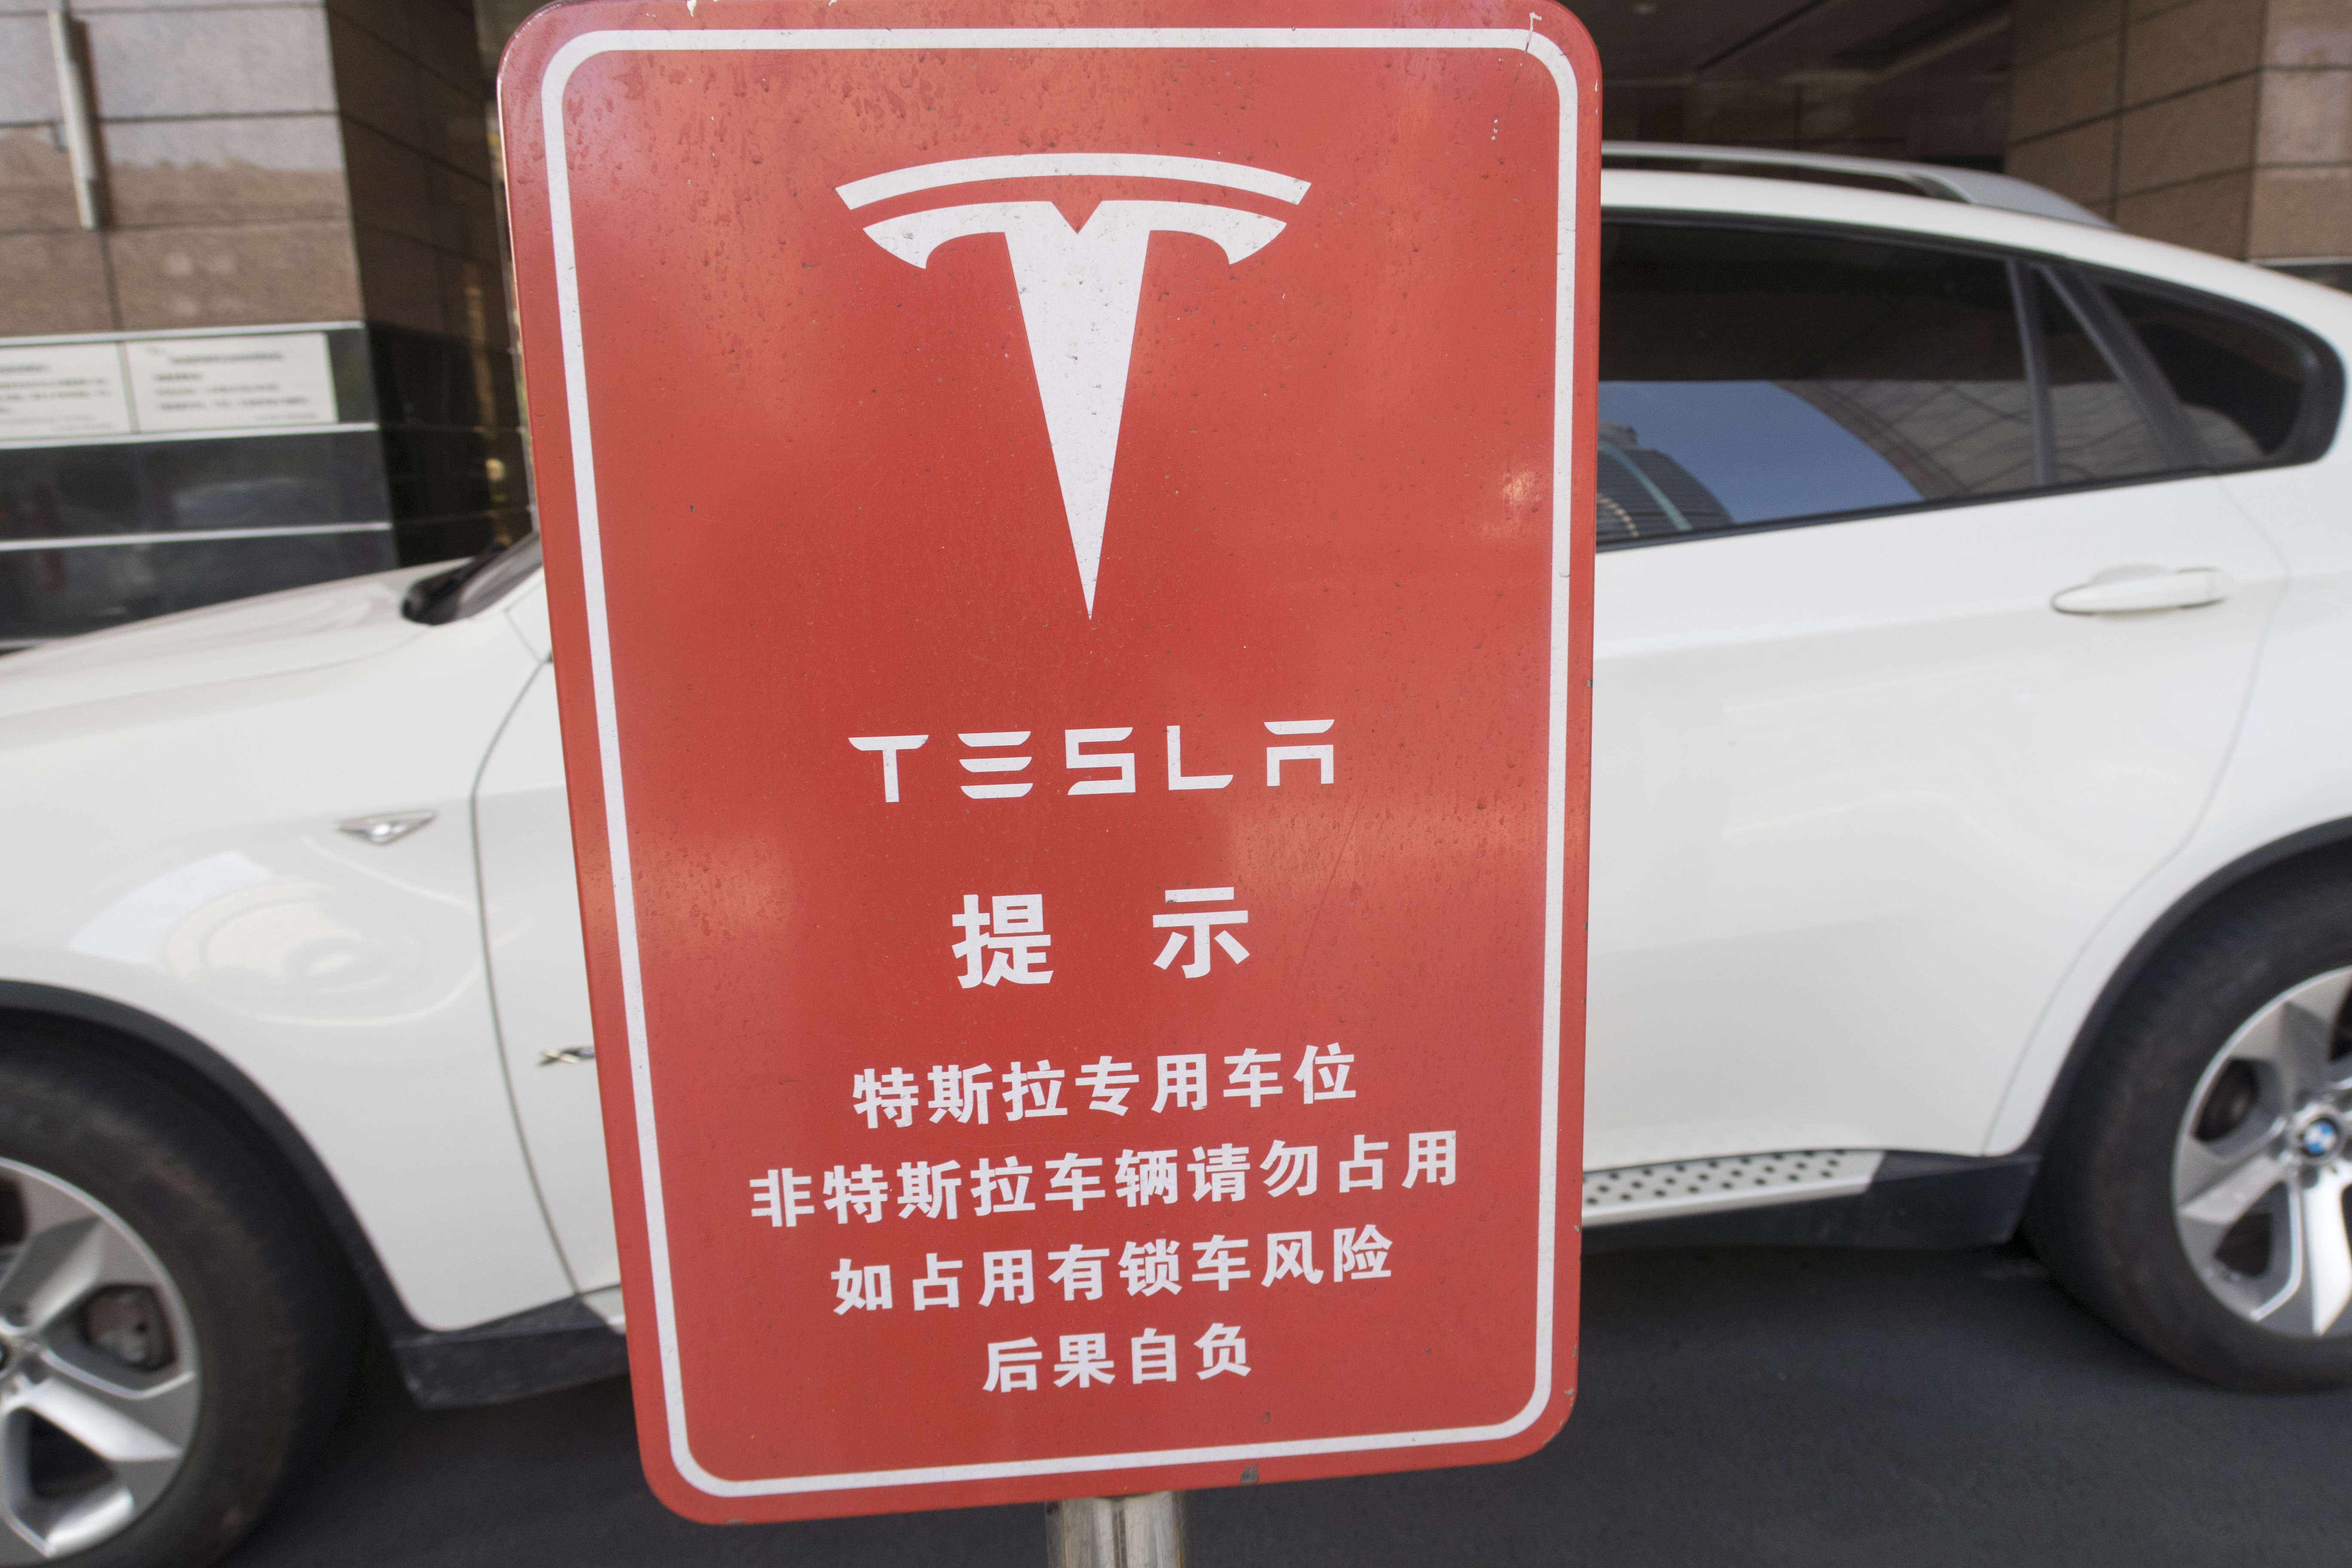 Tesla to build cars in China